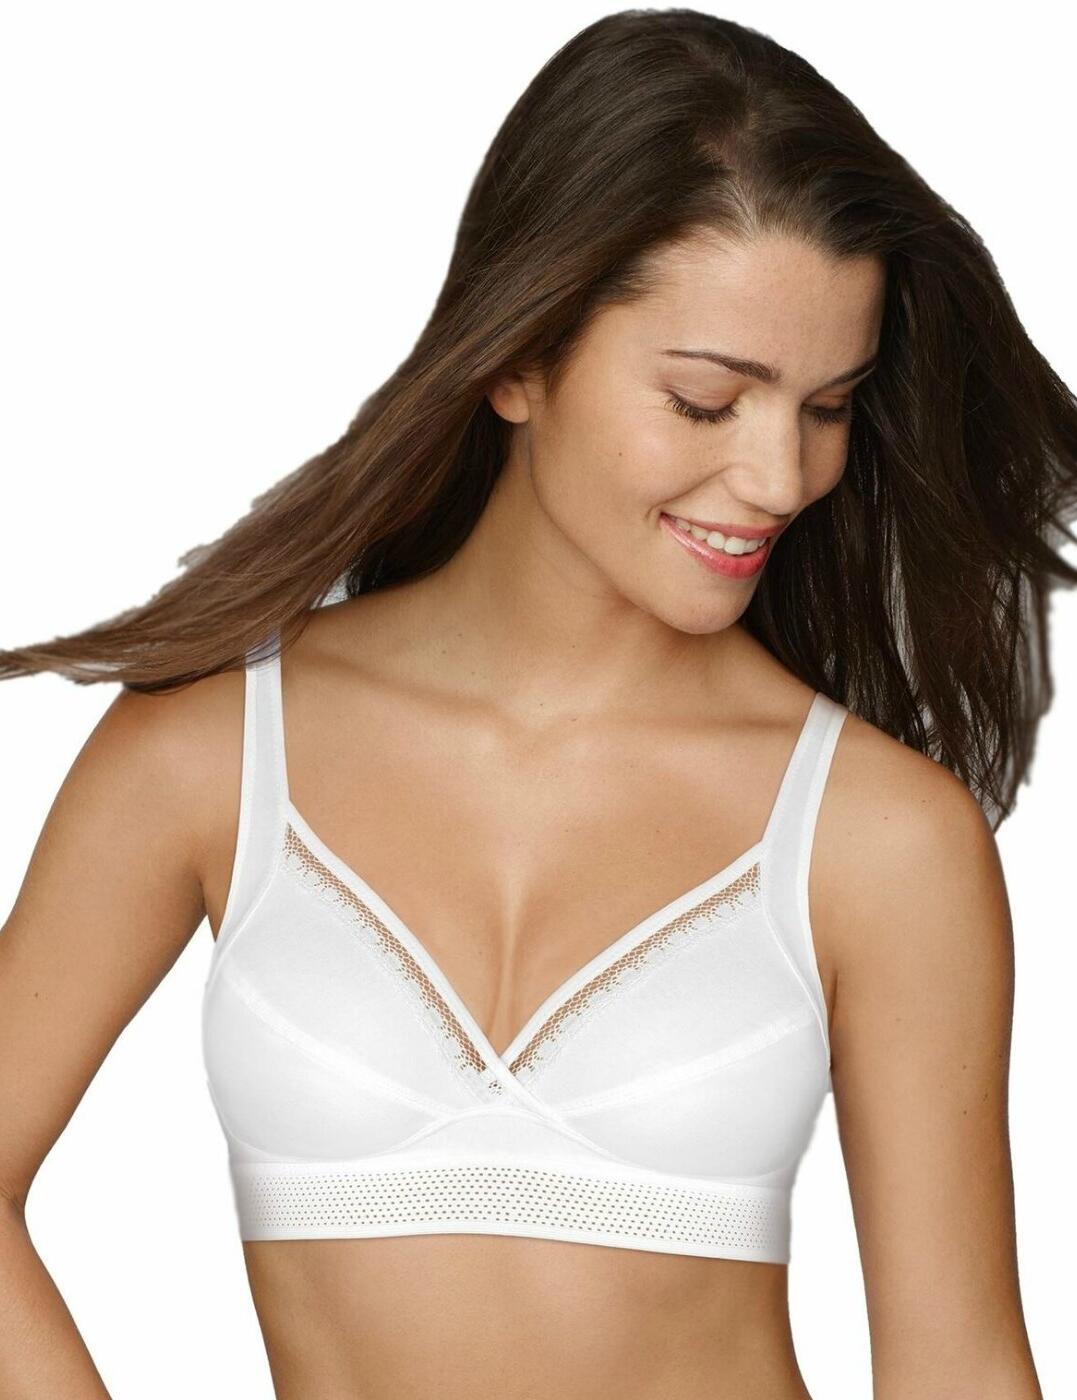 Playtex Feel Good Support Cotton Soft Cup Bra - Belle Lingerie